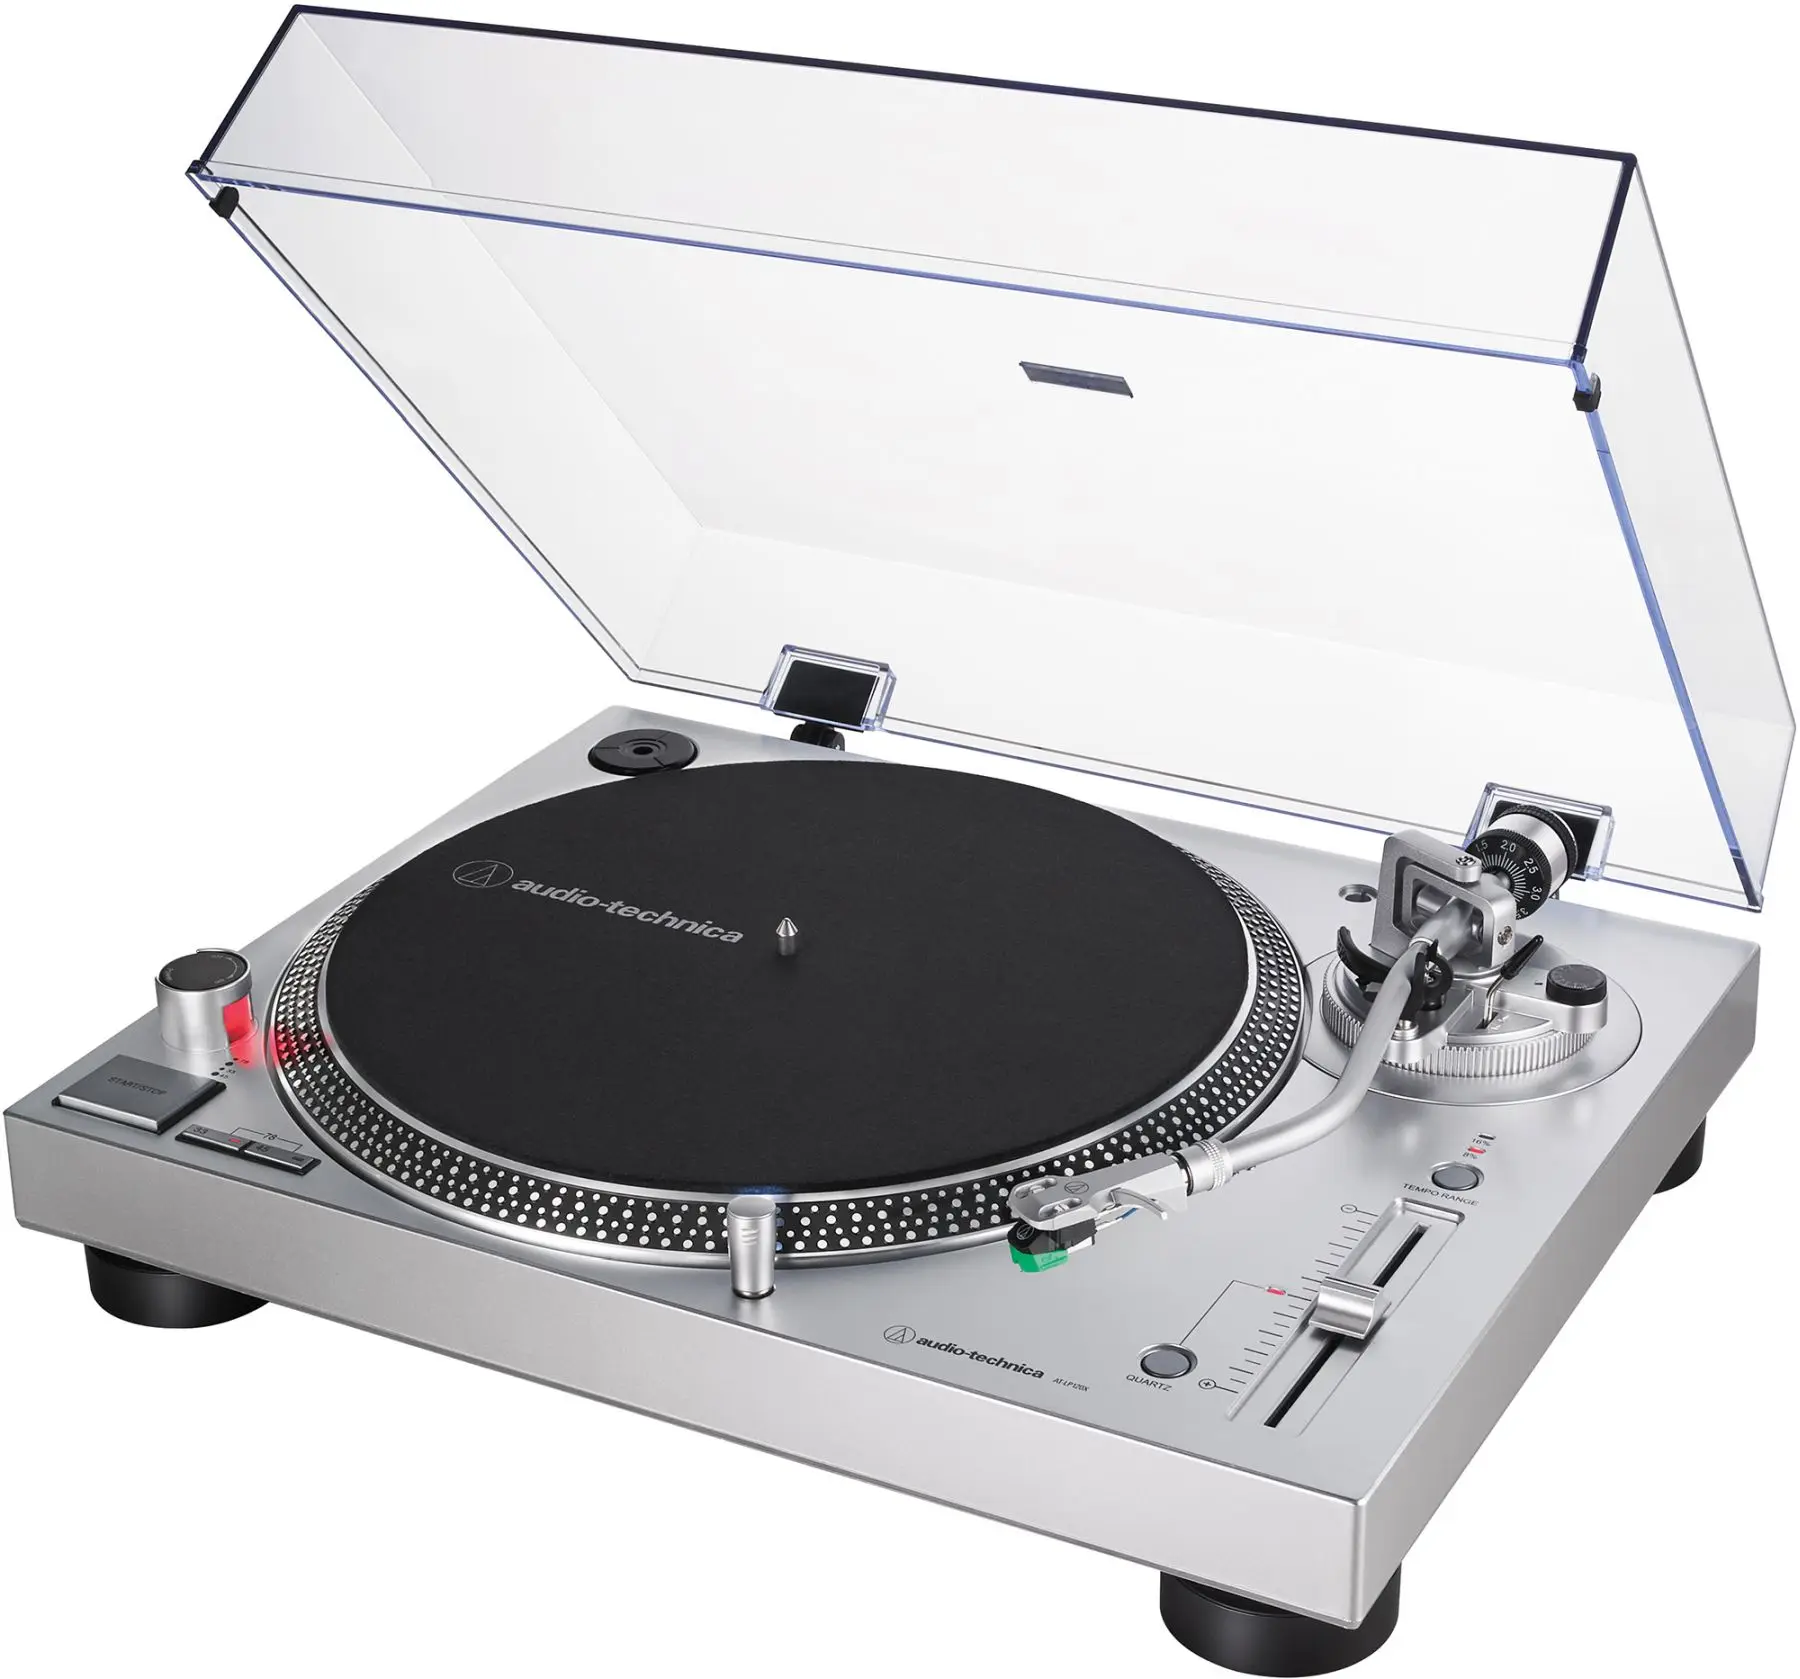 

Low Energy Consumer ON Audio-Technica AT-LP120XUSB-BK Direct Drive Turntable with USB